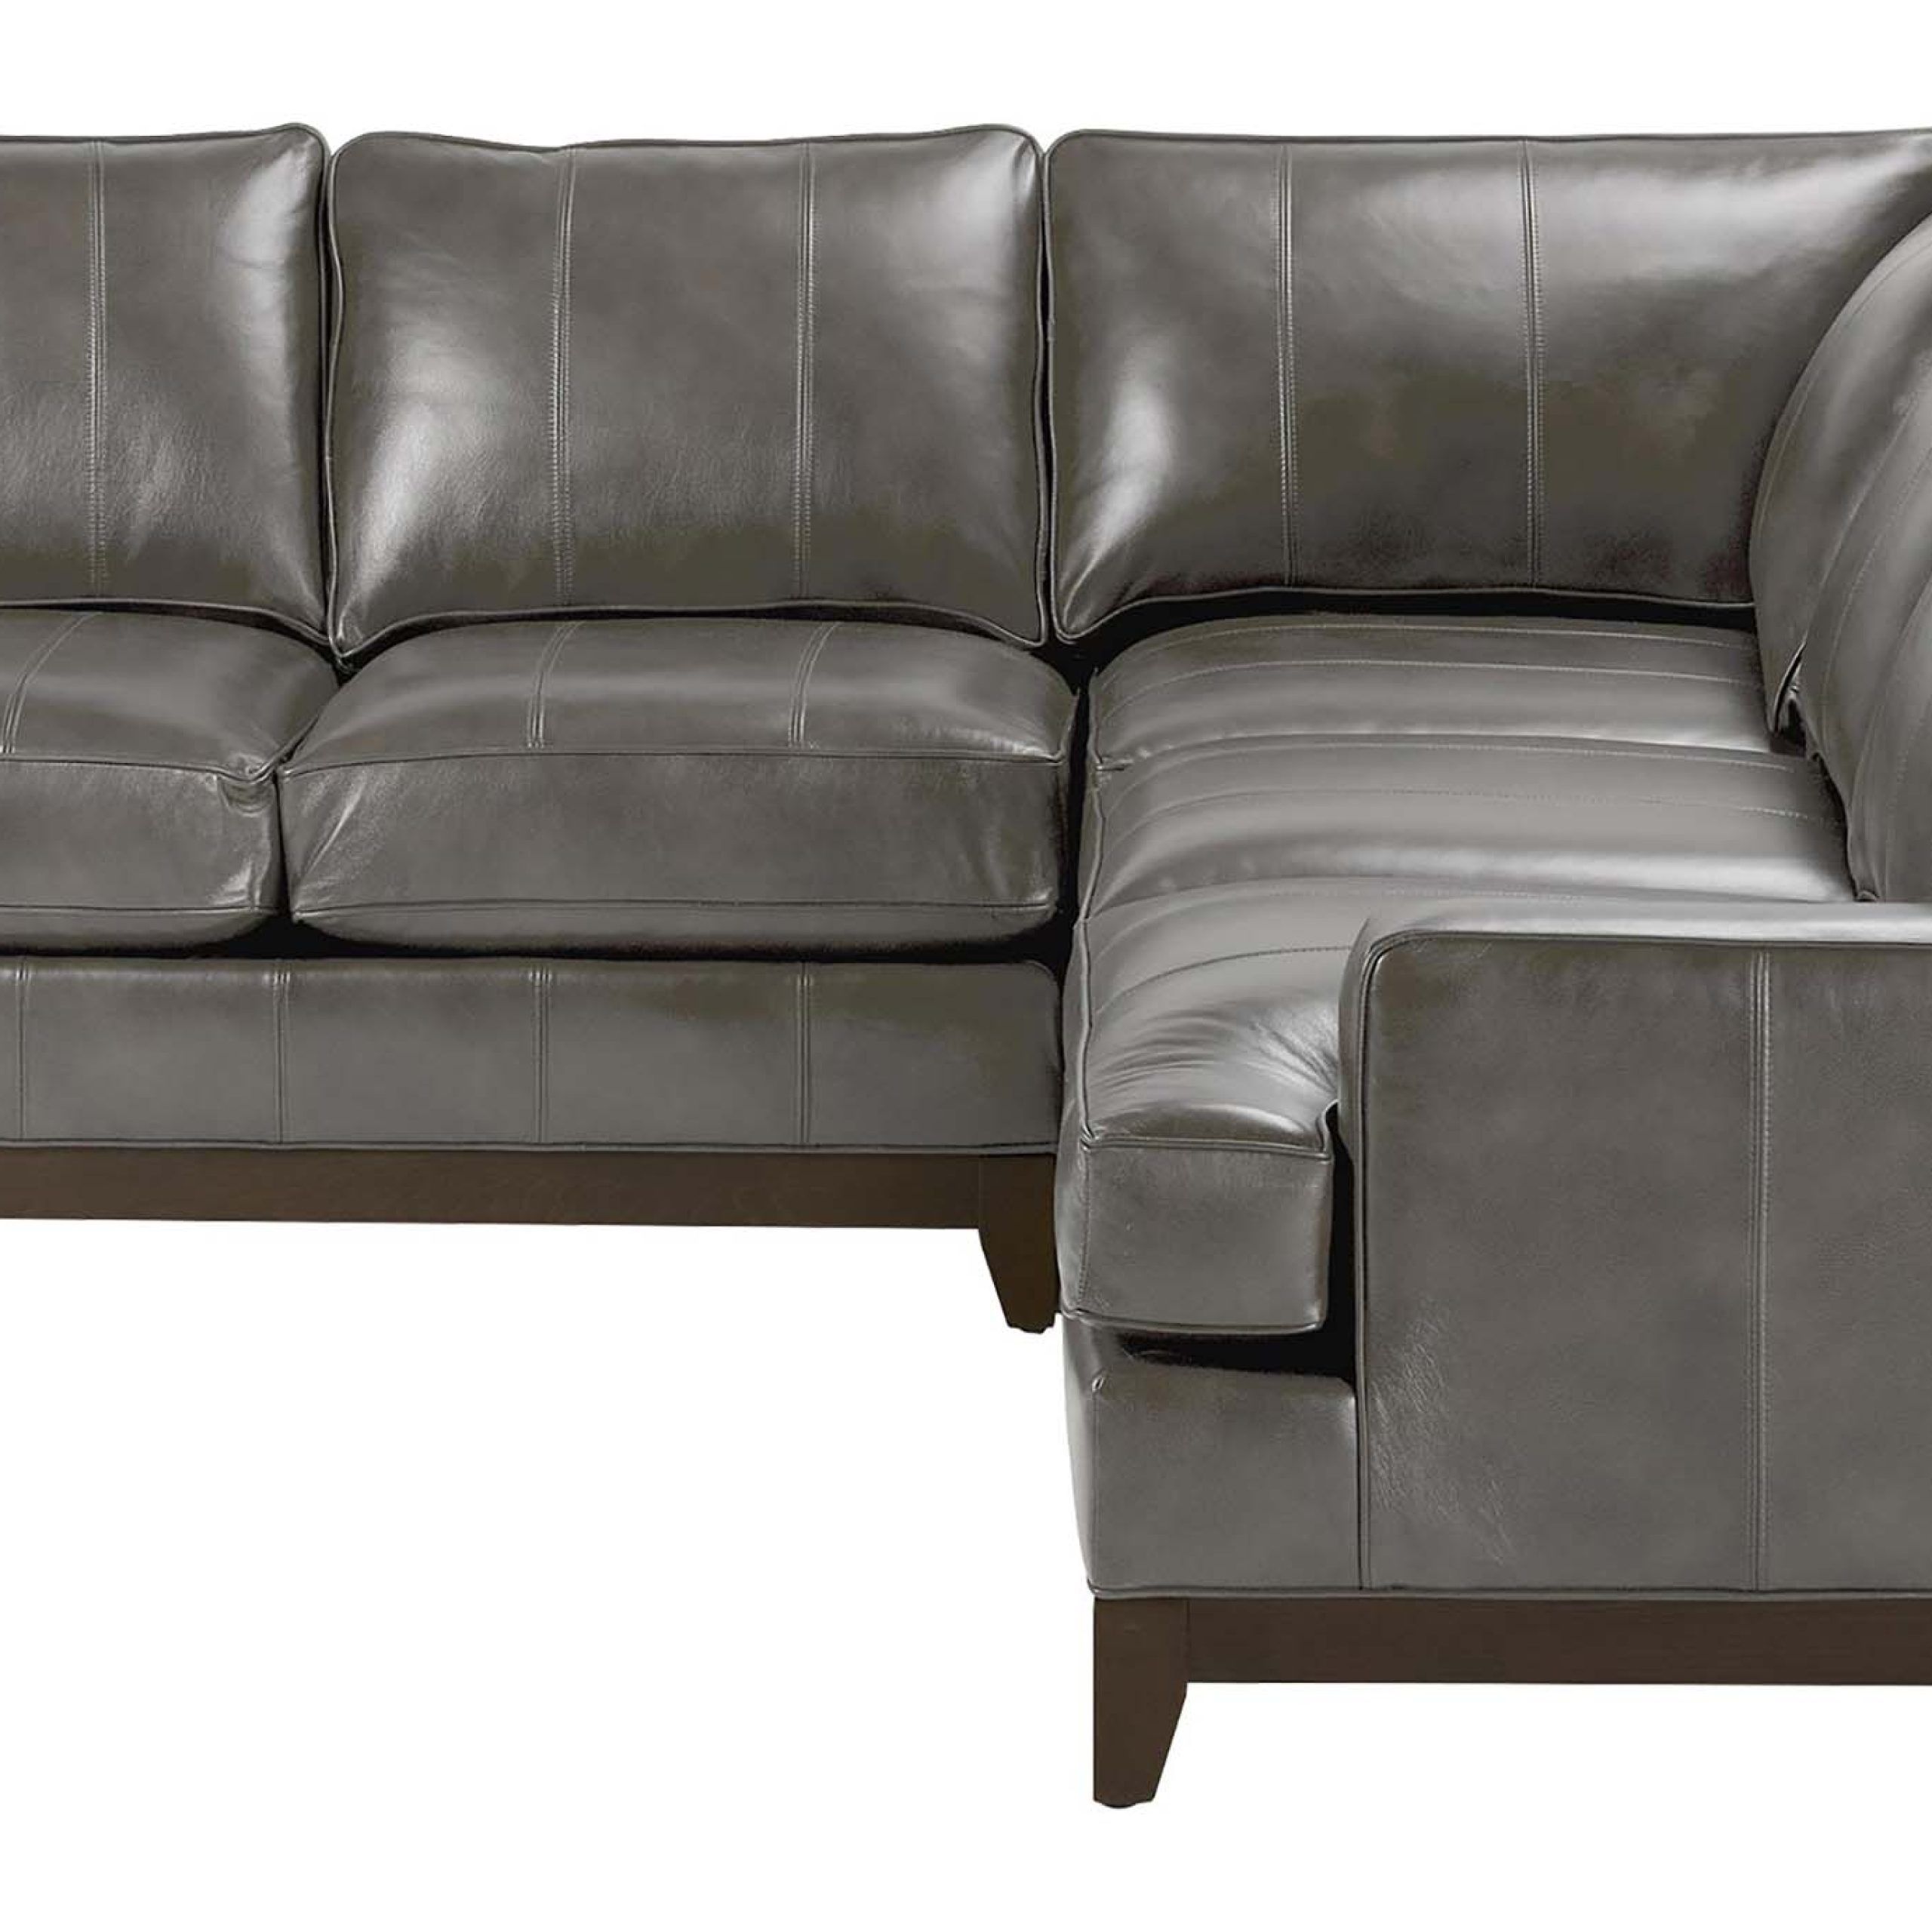 Ethan Allen With Regard To Most Recent 3 Piece Leather Sectional Sofa Sets (Photo 3 of 15)